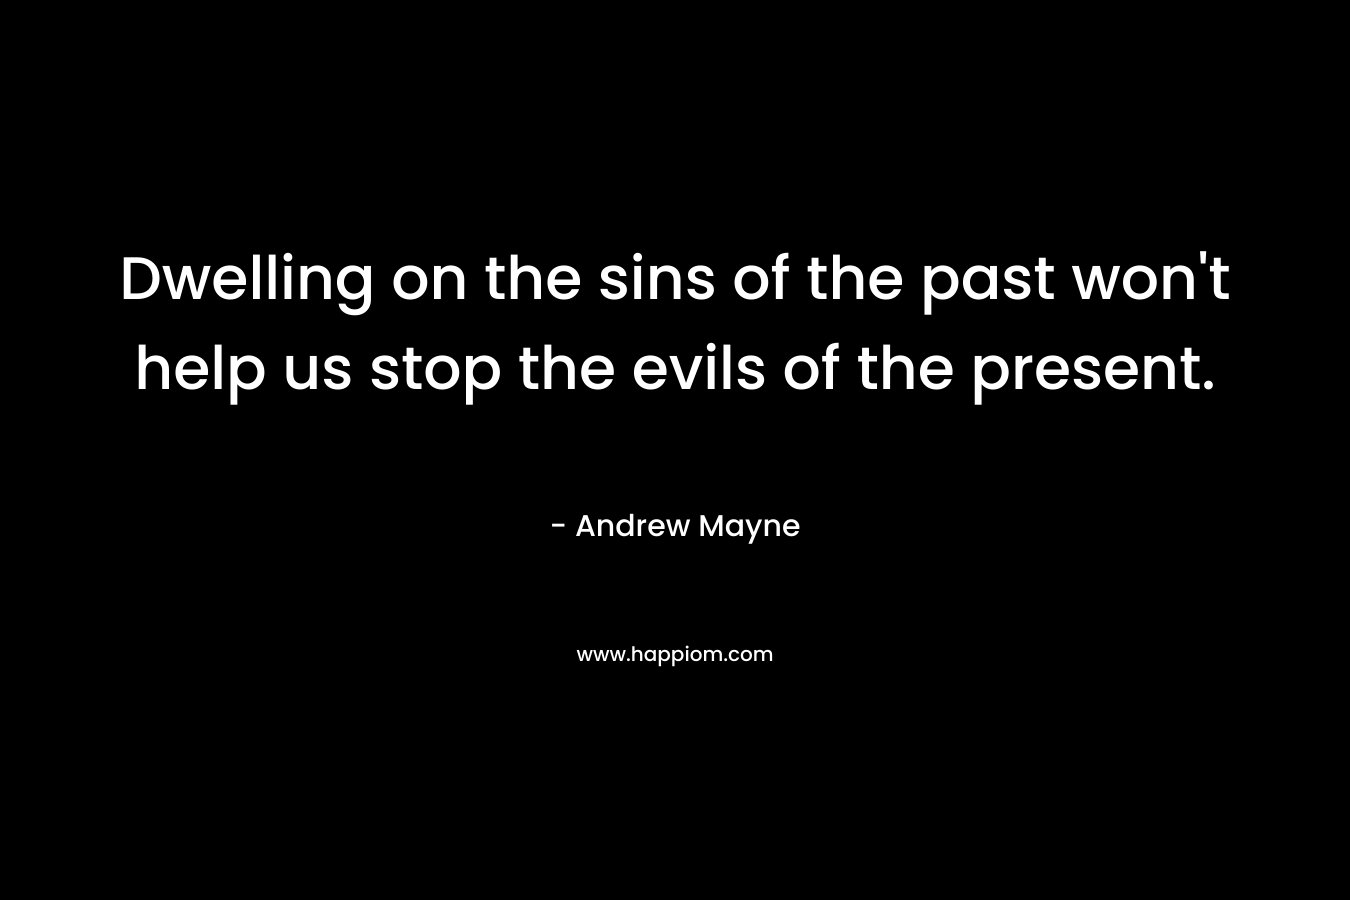 Dwelling on the sins of the past won’t help us stop the evils of the present. – Andrew Mayne